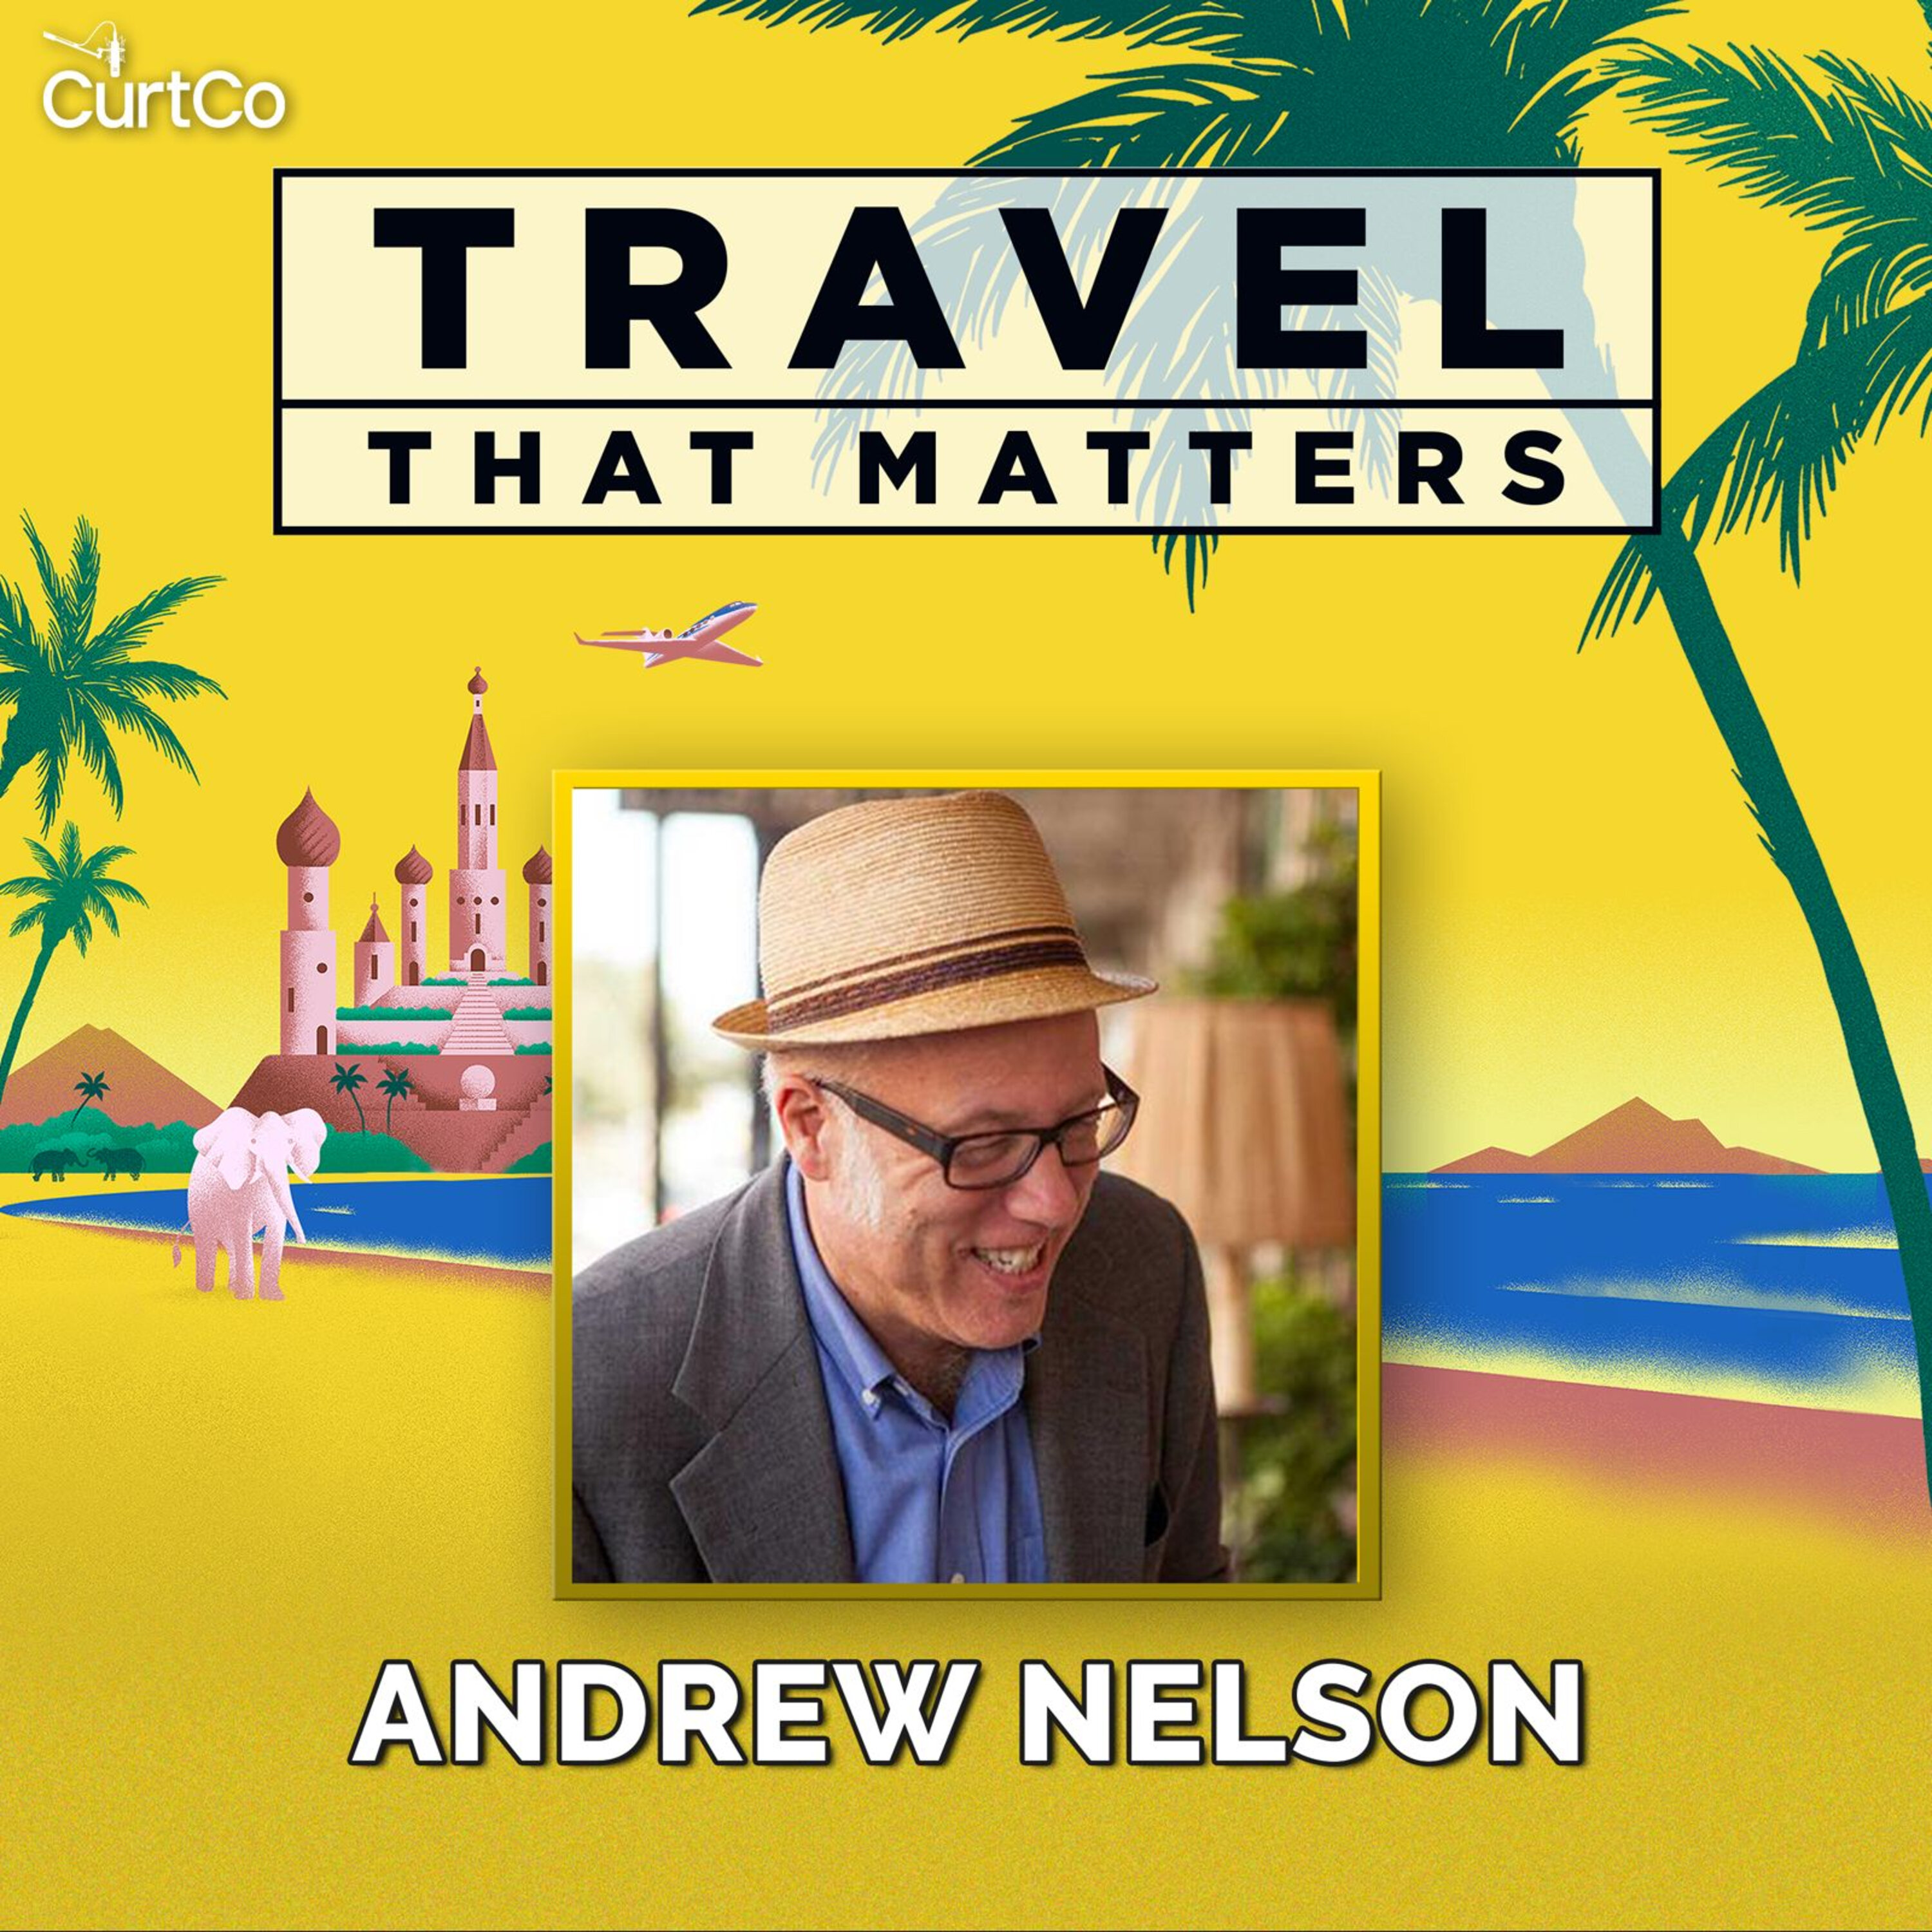 100 Unexpected Destinations to Add to Your Travel Wishlist with National Geographic’s Andrew Nelson: Lecce (Italy), Luang Prabang (Laos), Indianapolis, Manchester (England), and More